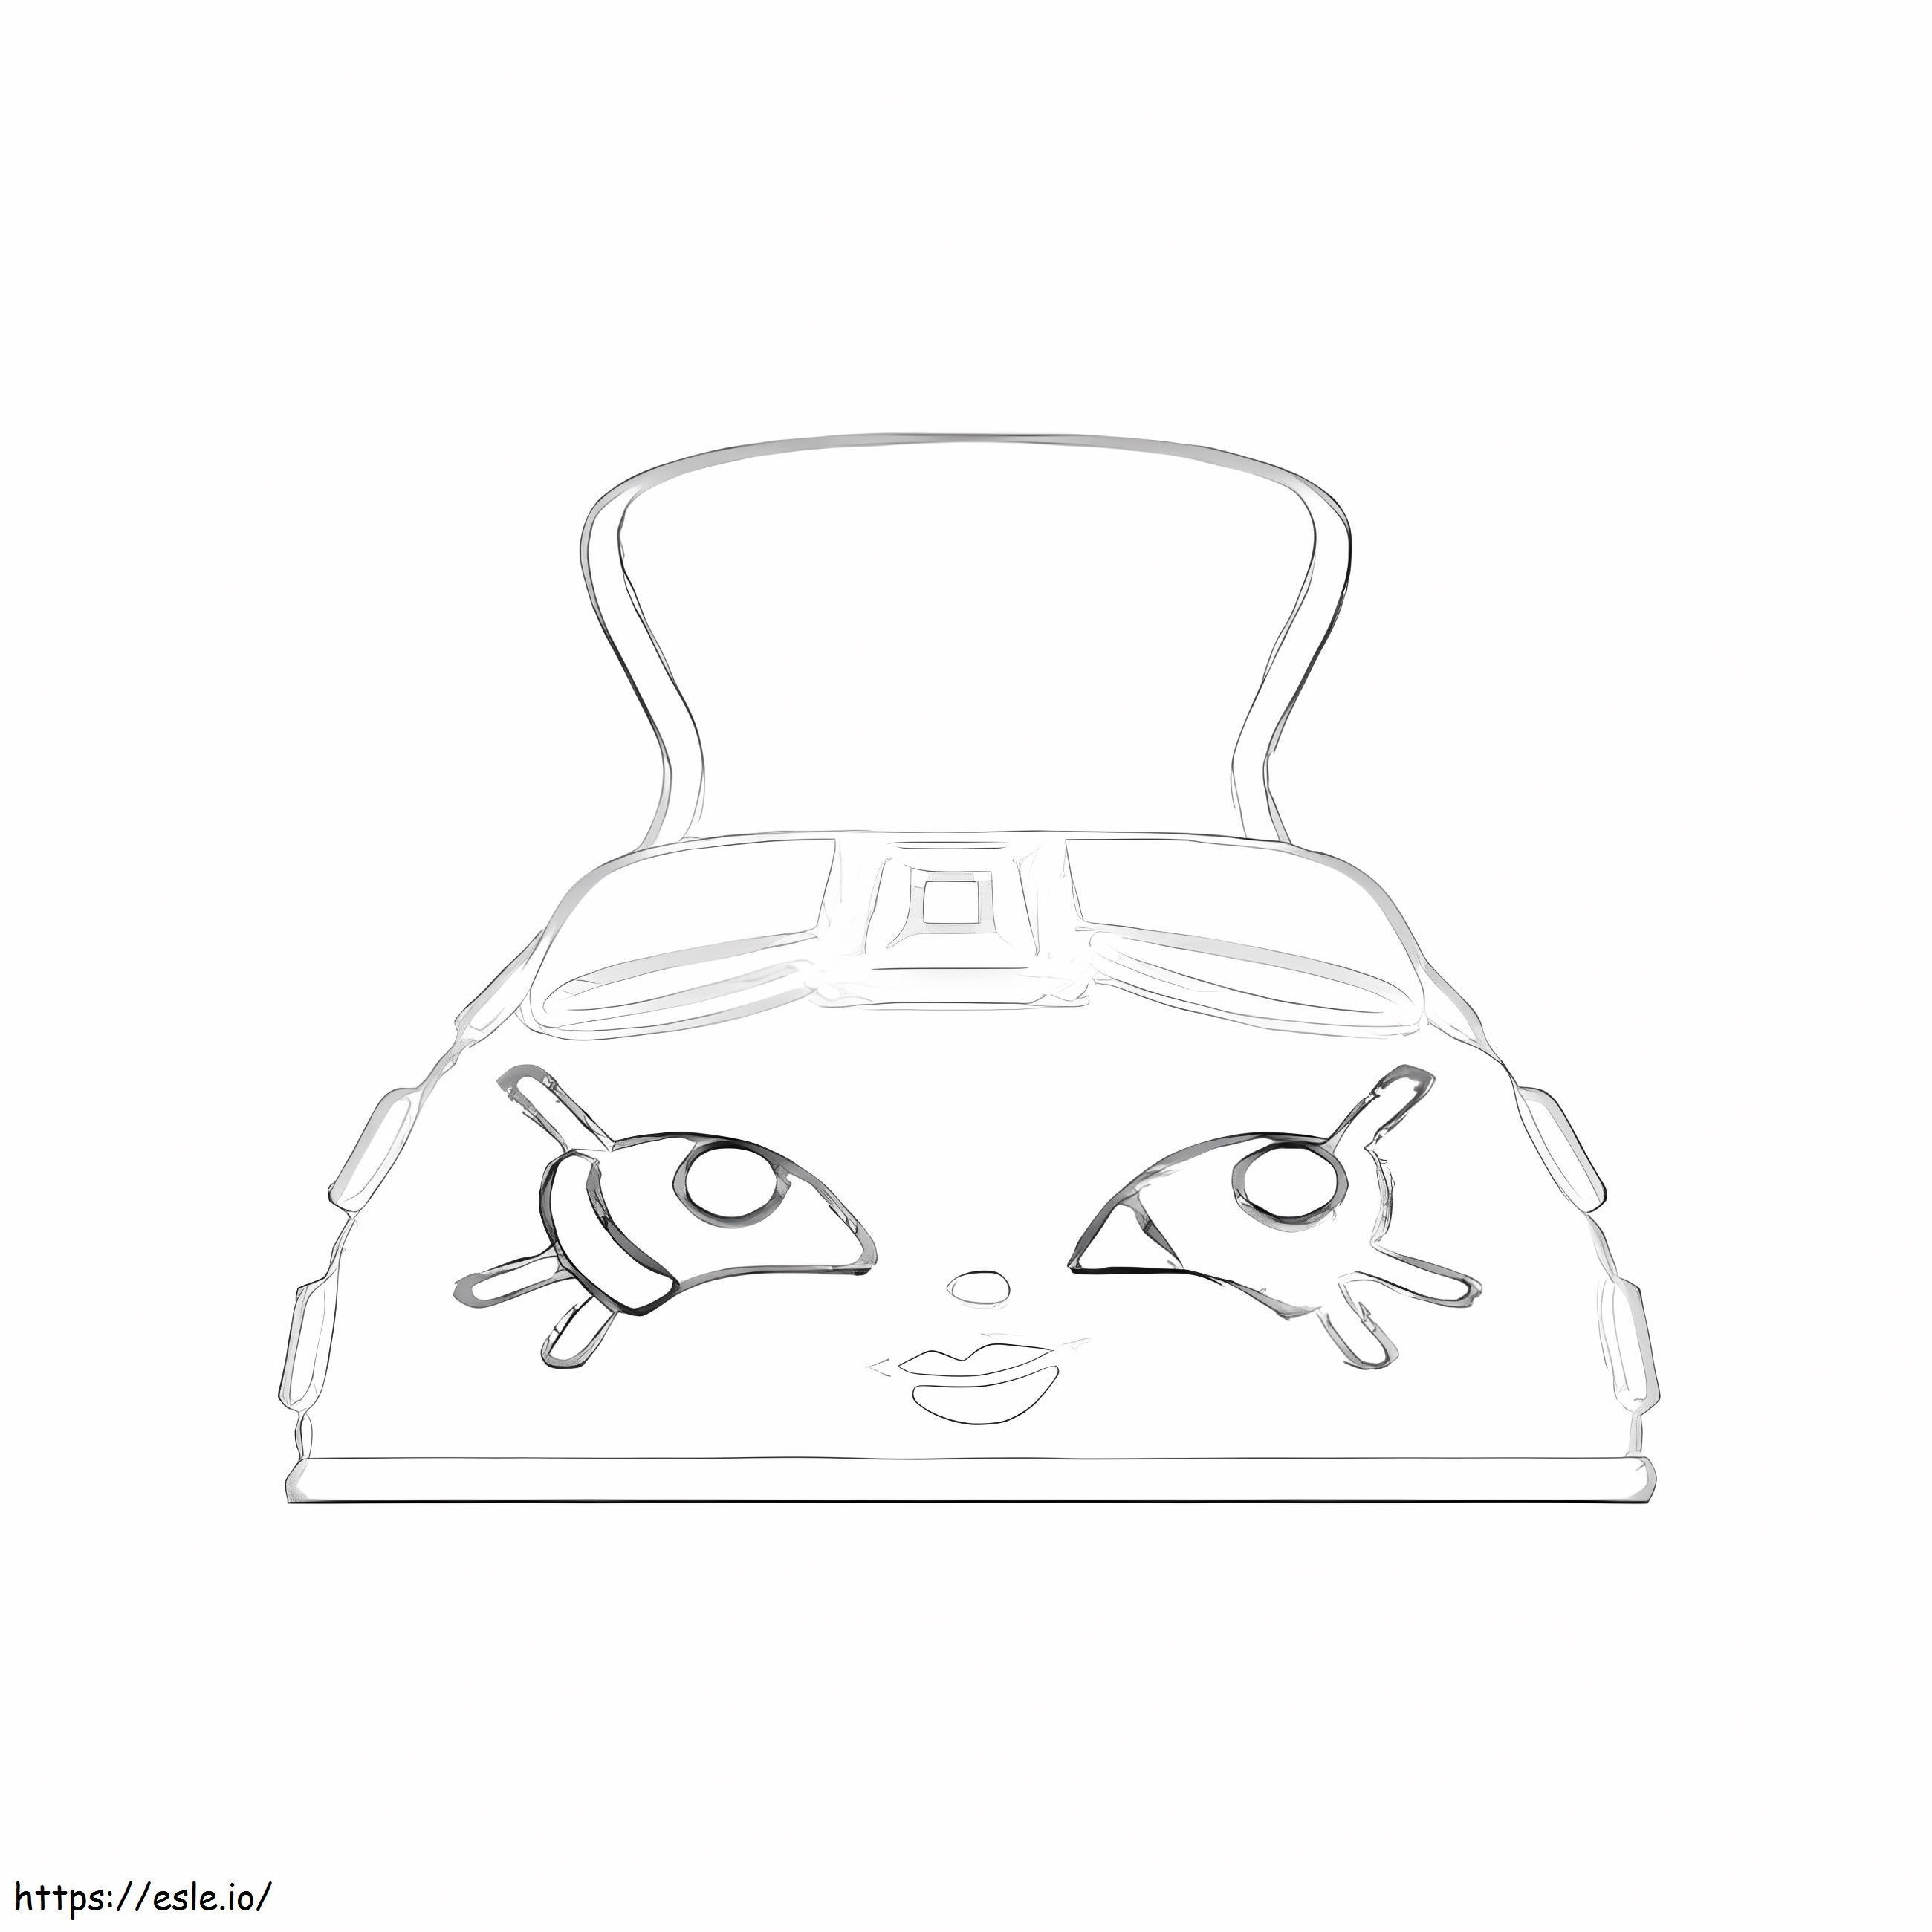 HEELY Shopkin coloring page